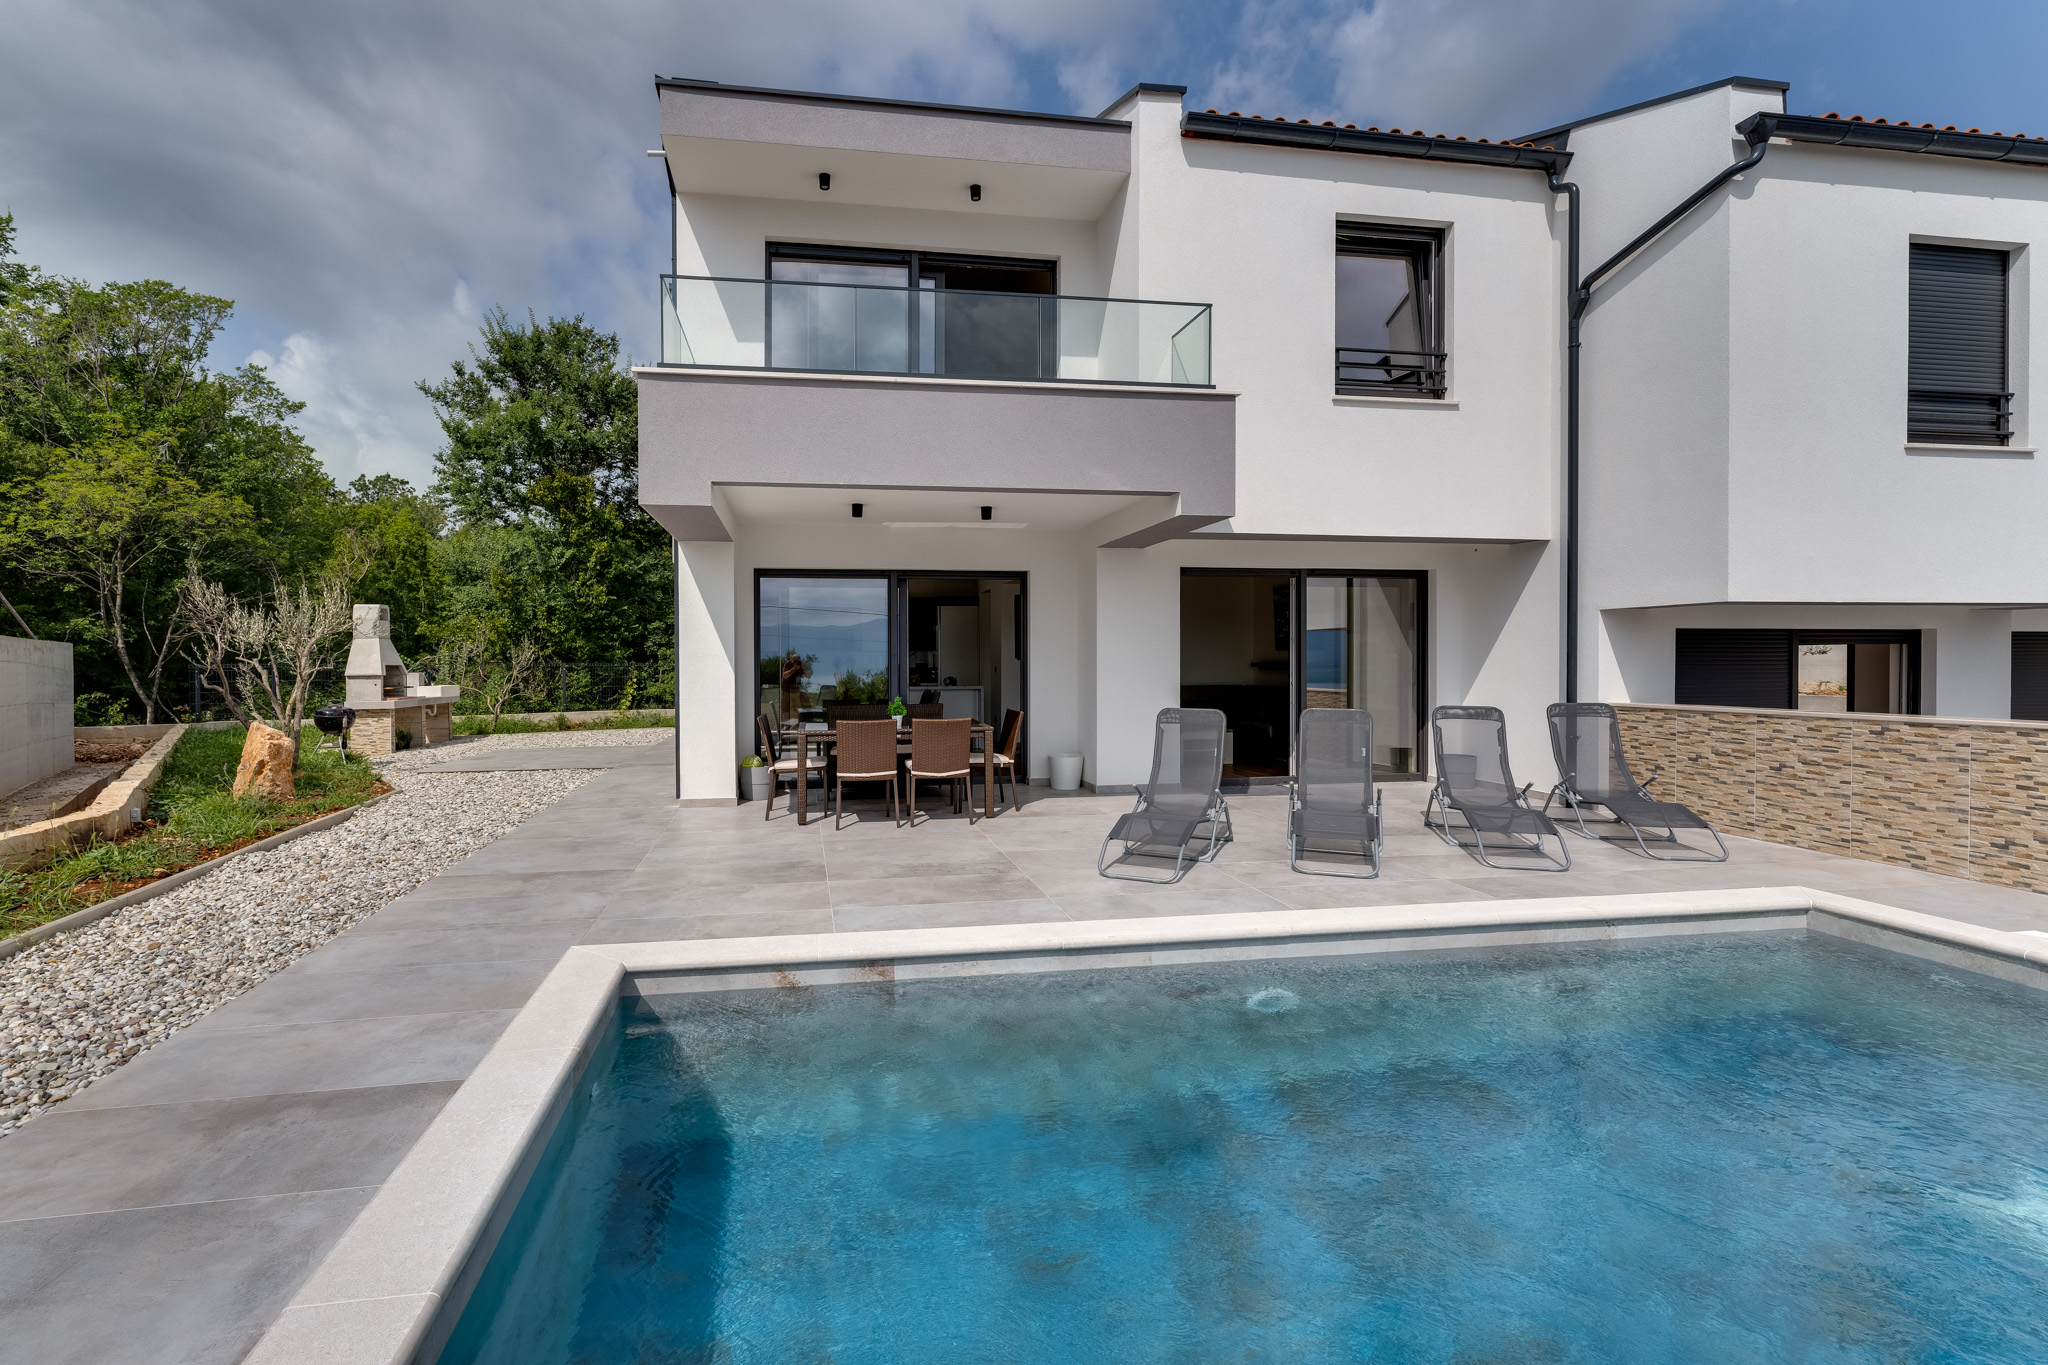 Villa with a pool and a panoramic view, close to a sandy beach